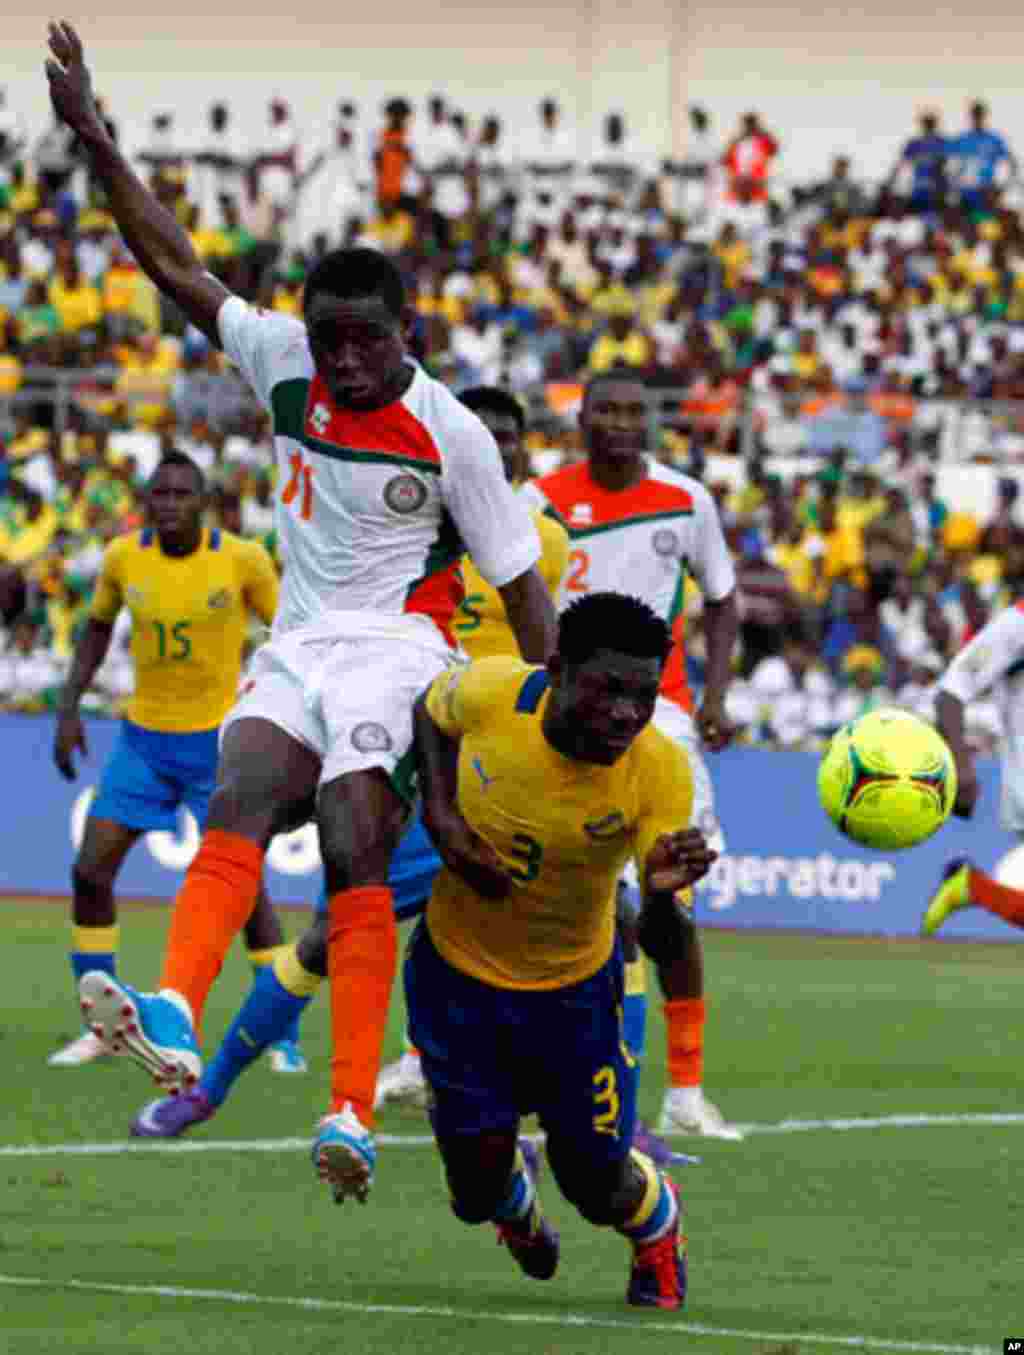 Gabon's Edmond is challenged by Niger's Issoufou during their African Cup of Nations soccer match in Libreville